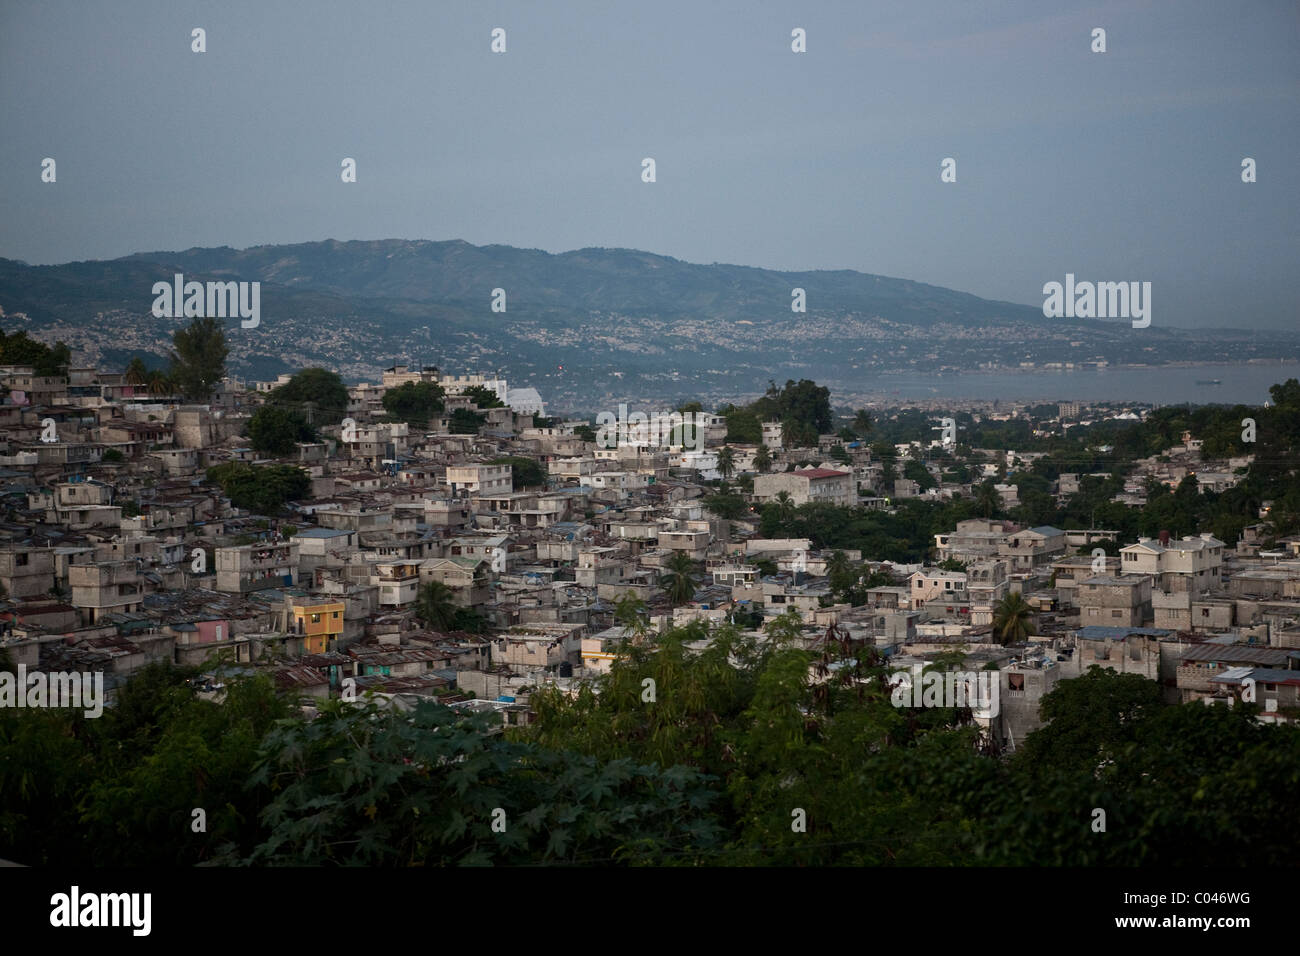 View over central Port au Prince, Haiti before the 2010 earthquake. Stock Photo